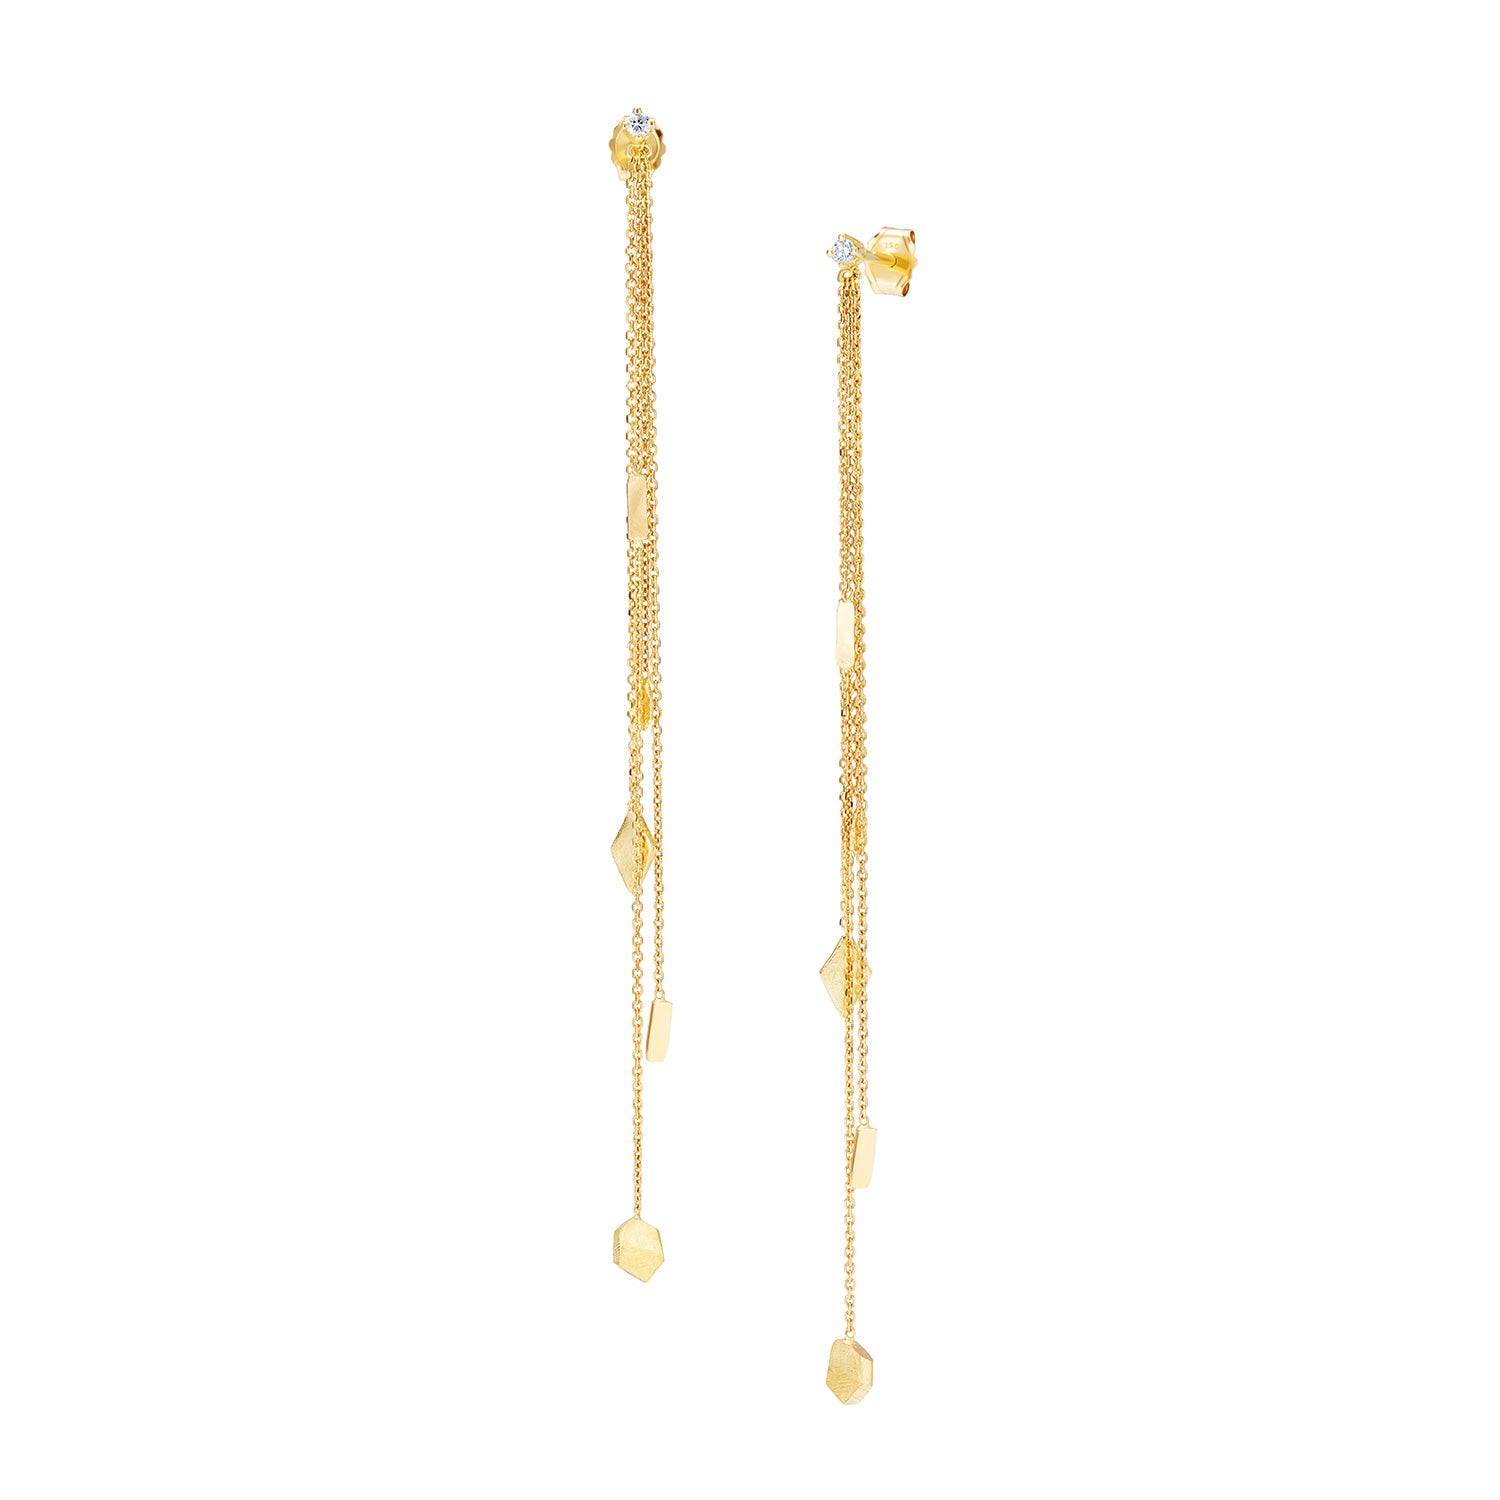 18ct Gold diamond stud with three hanging chains and mixed gold shapes on ends